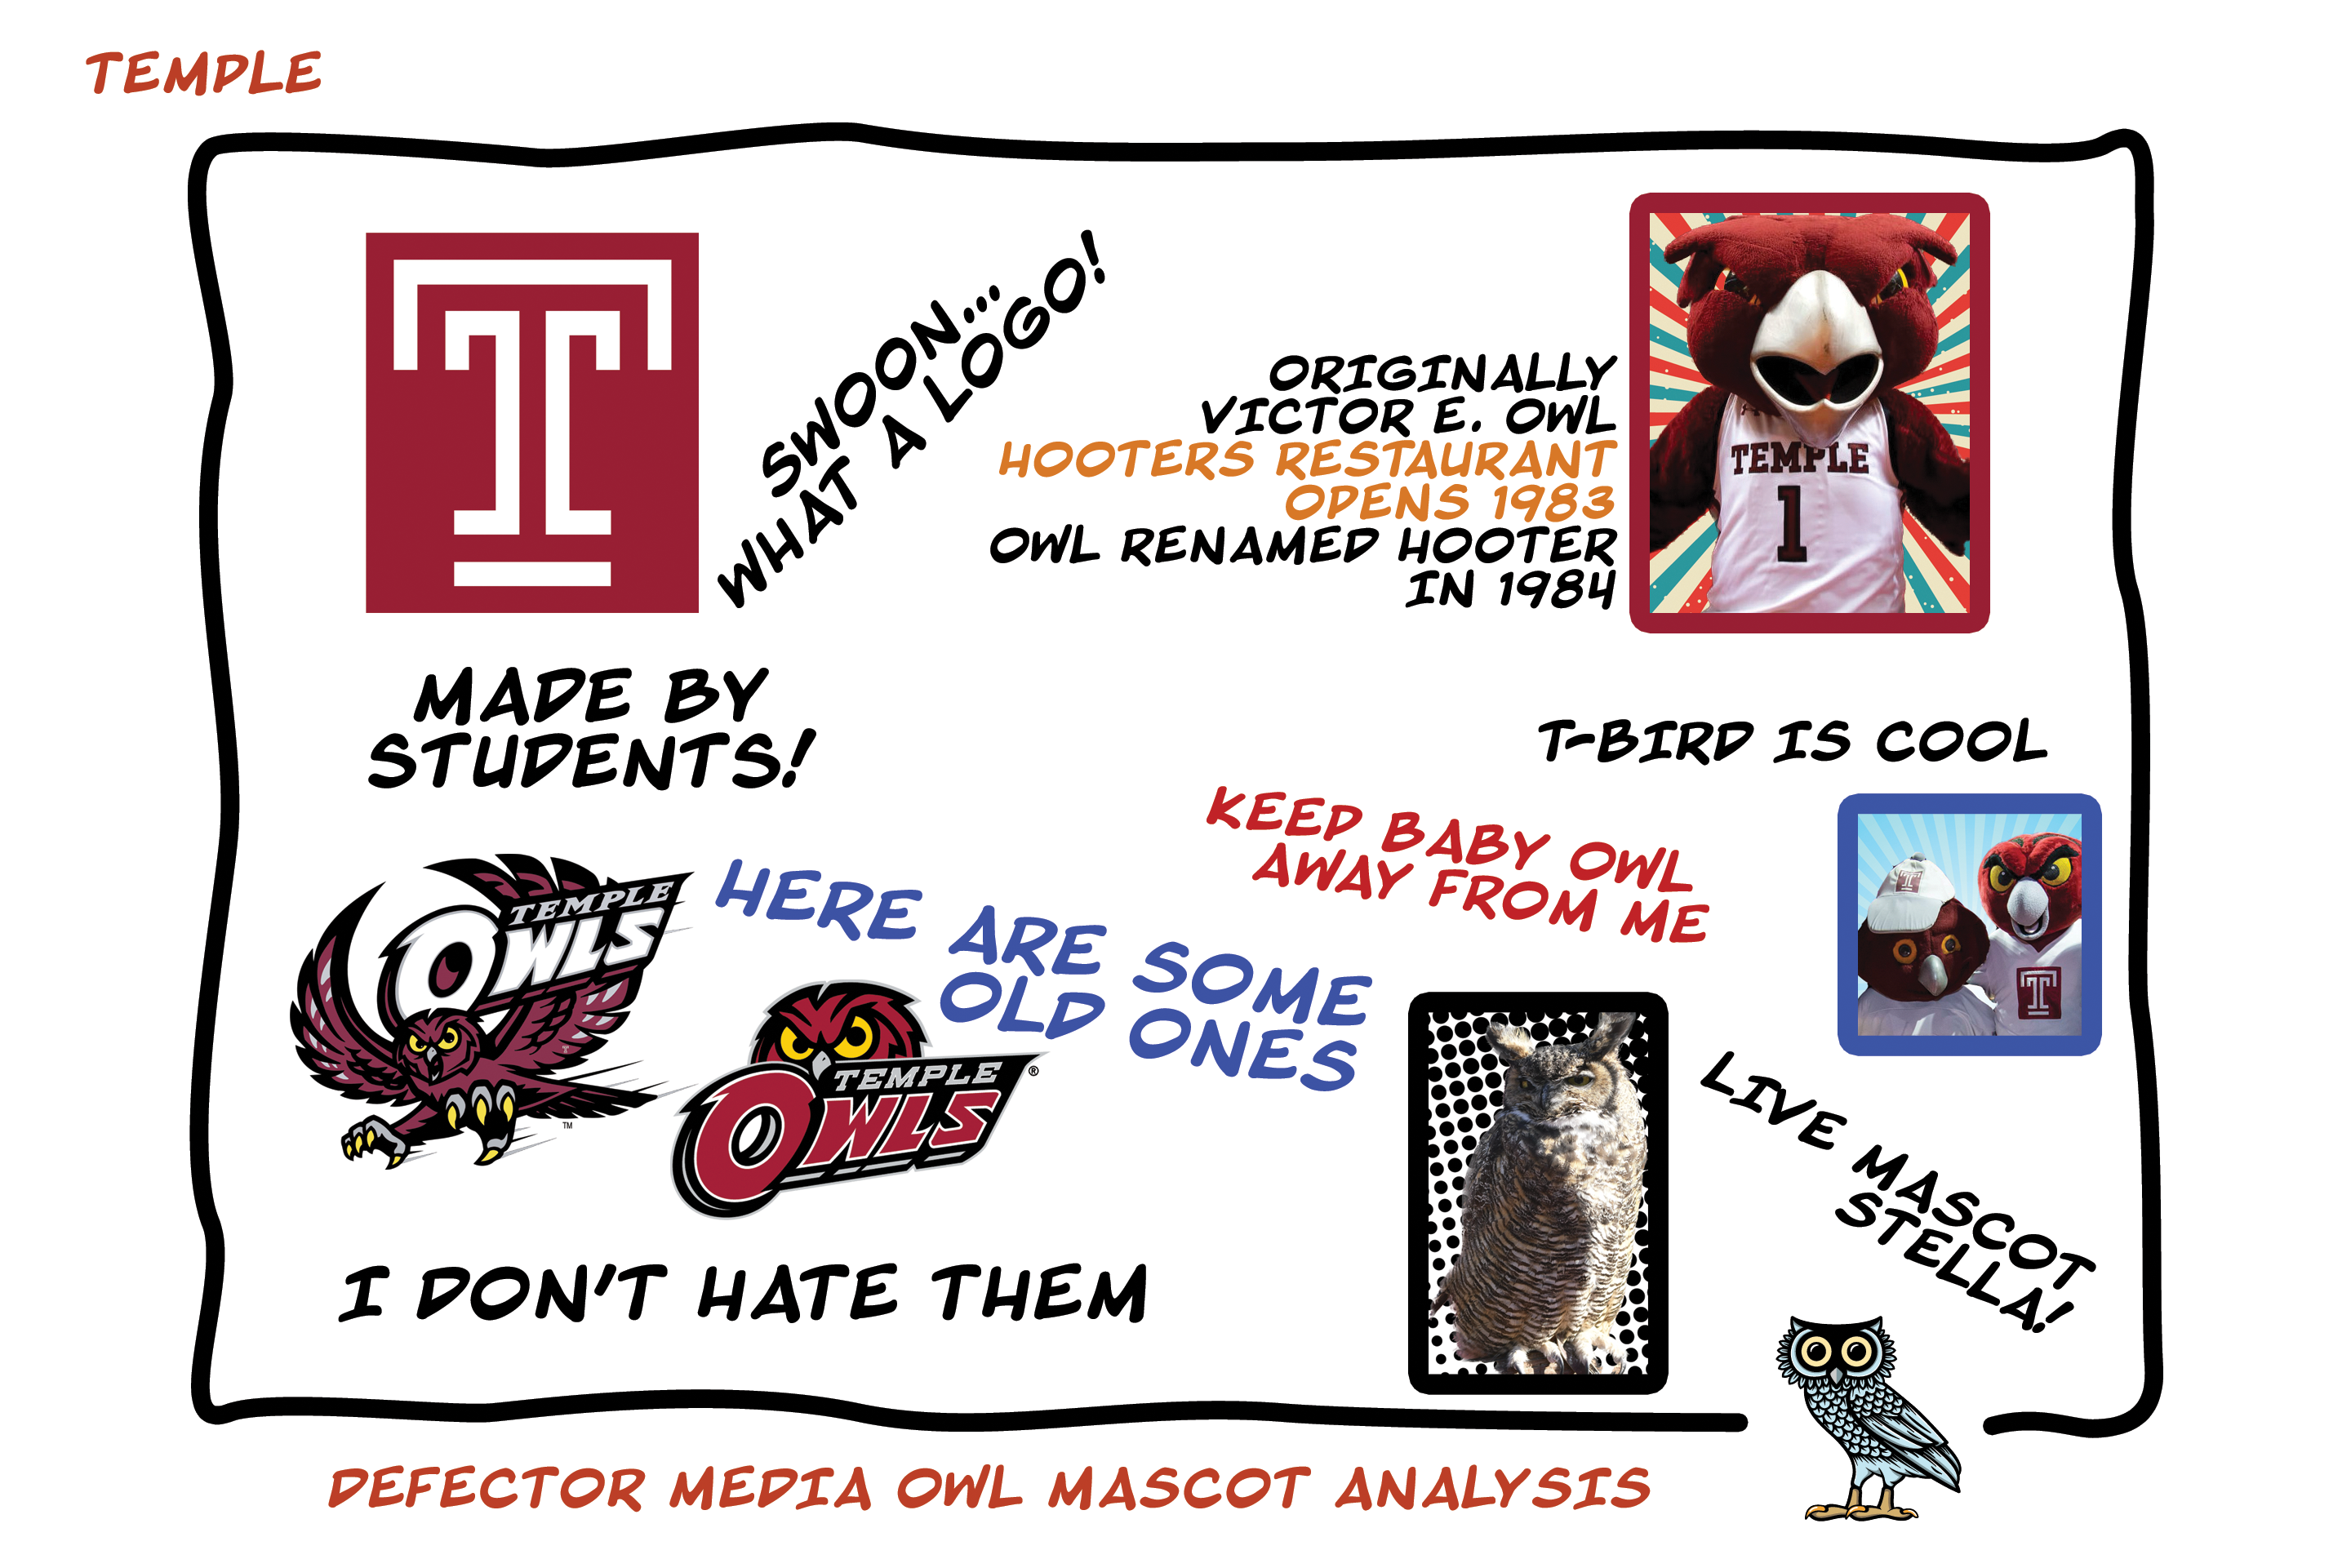 [Image: TEMPLE-owl-facts-FIX.png]